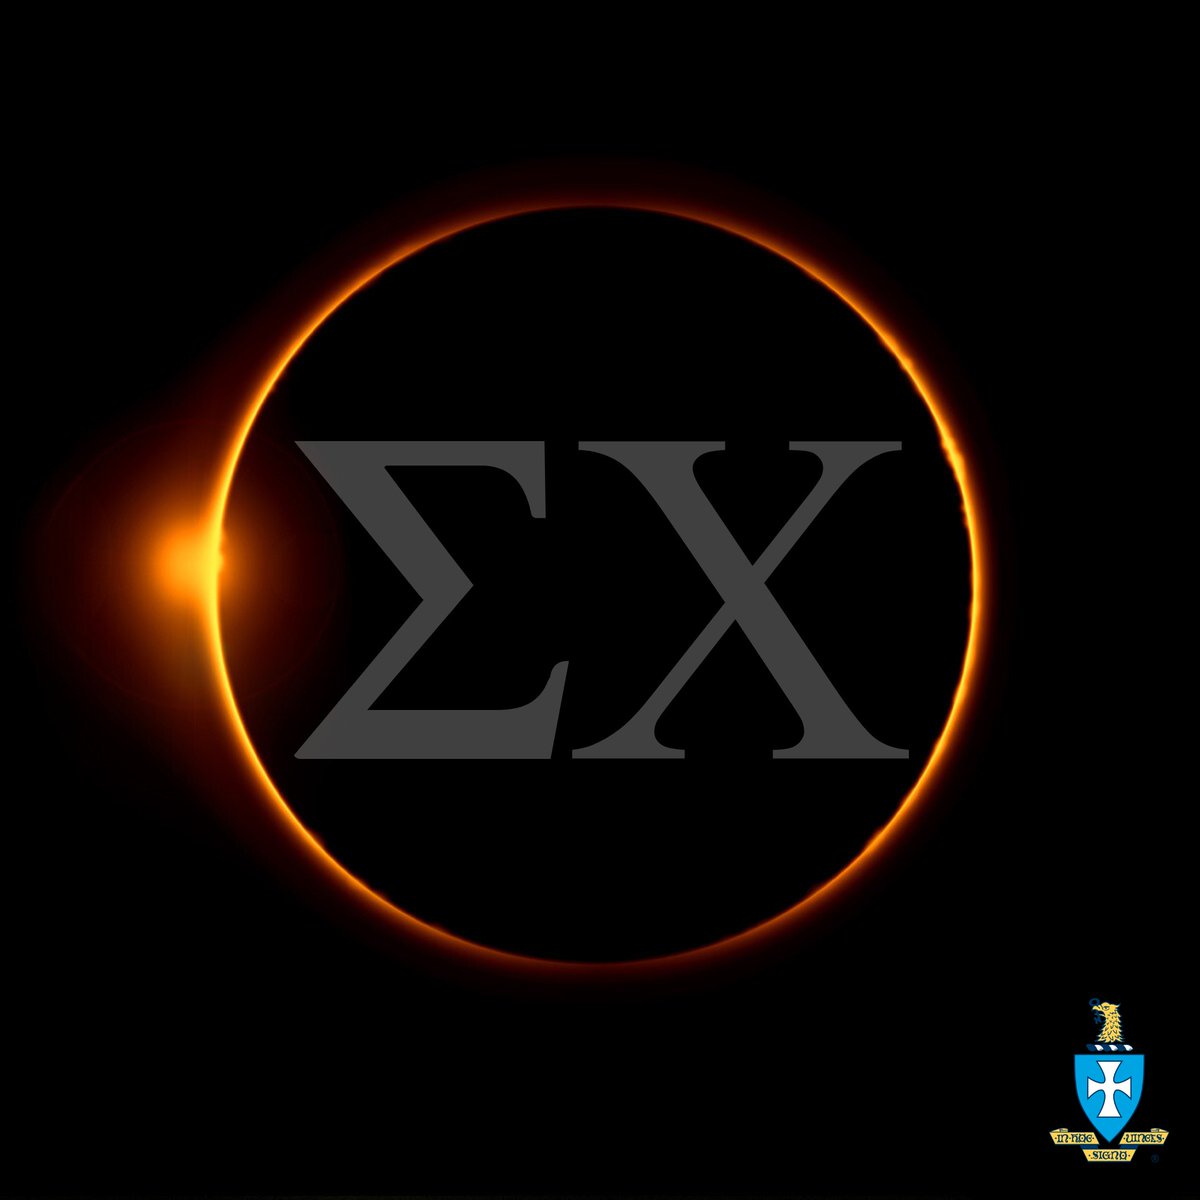 Sigma Chi has just reached totality 👀🌑 Will you or your chapter be watching the eclipse? #Eclipse2024